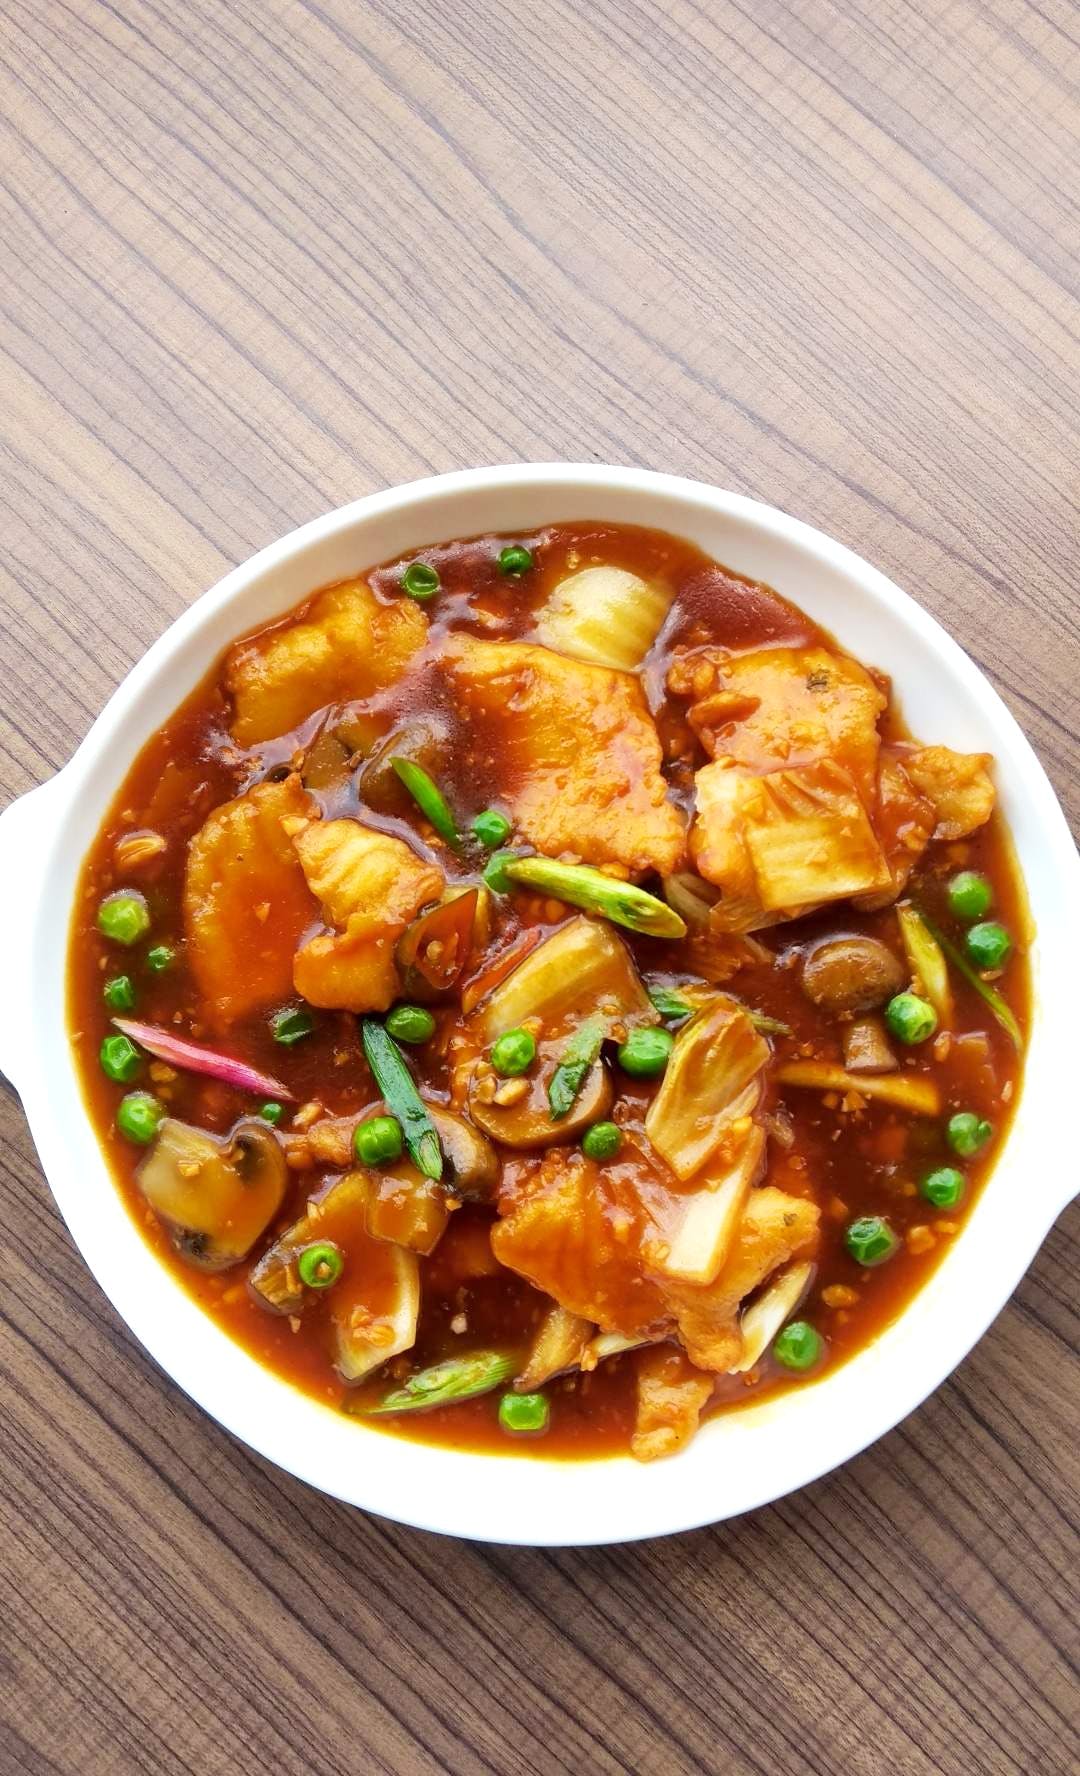 Dish,Food,Cuisine,Ingredient,Meat,Curry,Mapo doufu,Produce,Recipe,Kung pao chicken